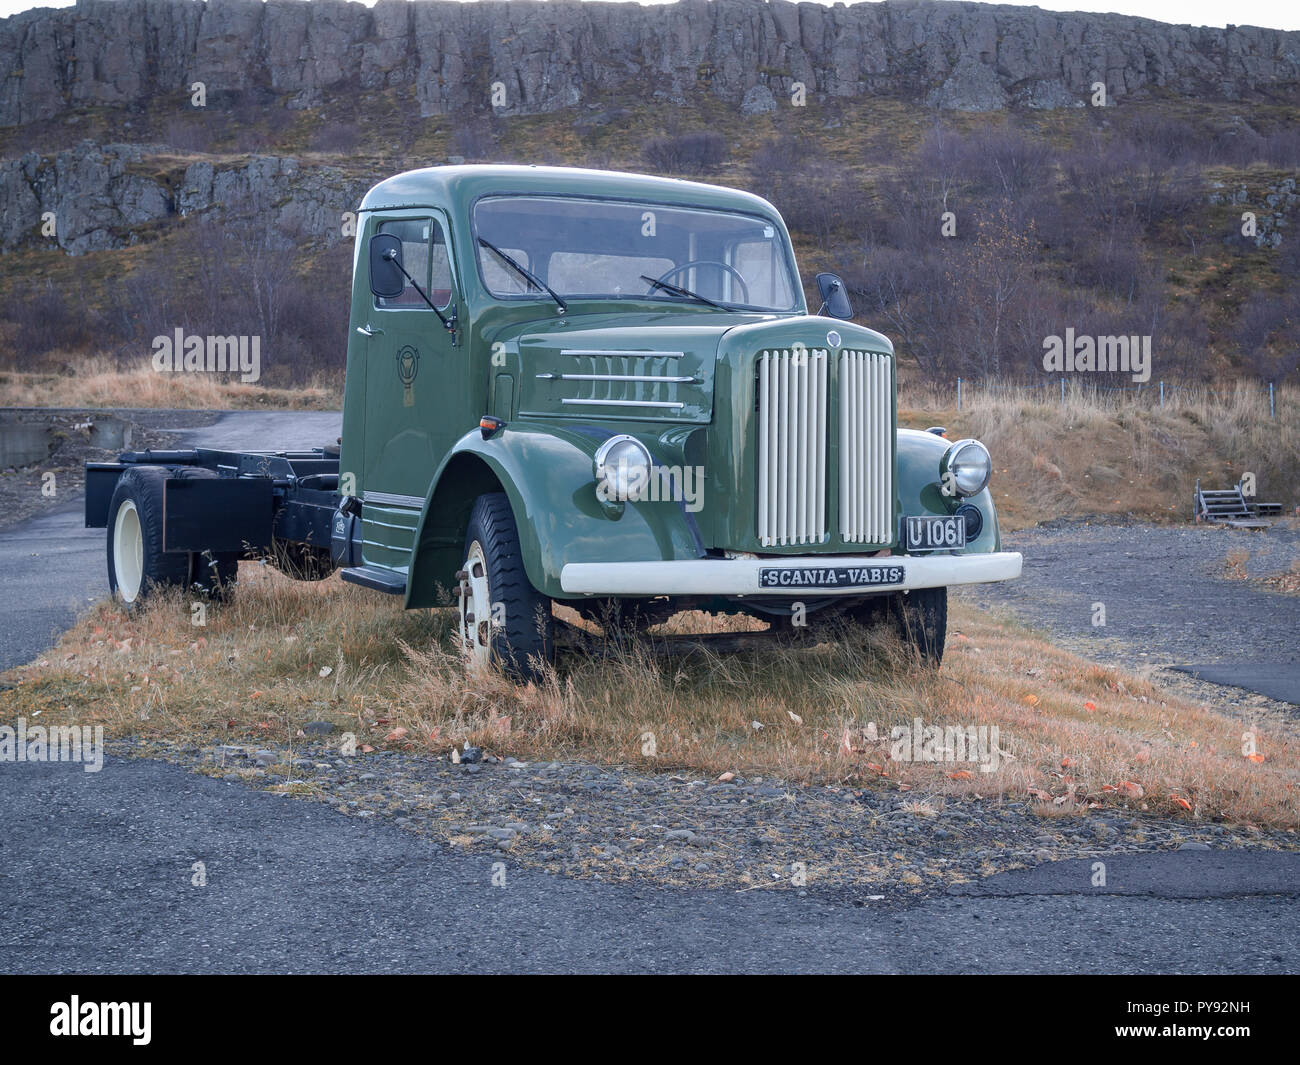 HUSAVIK, ICELAND-OCTOBER 19, 2018:1950 Scania-Vabis Truck at the city streets Stock Photo